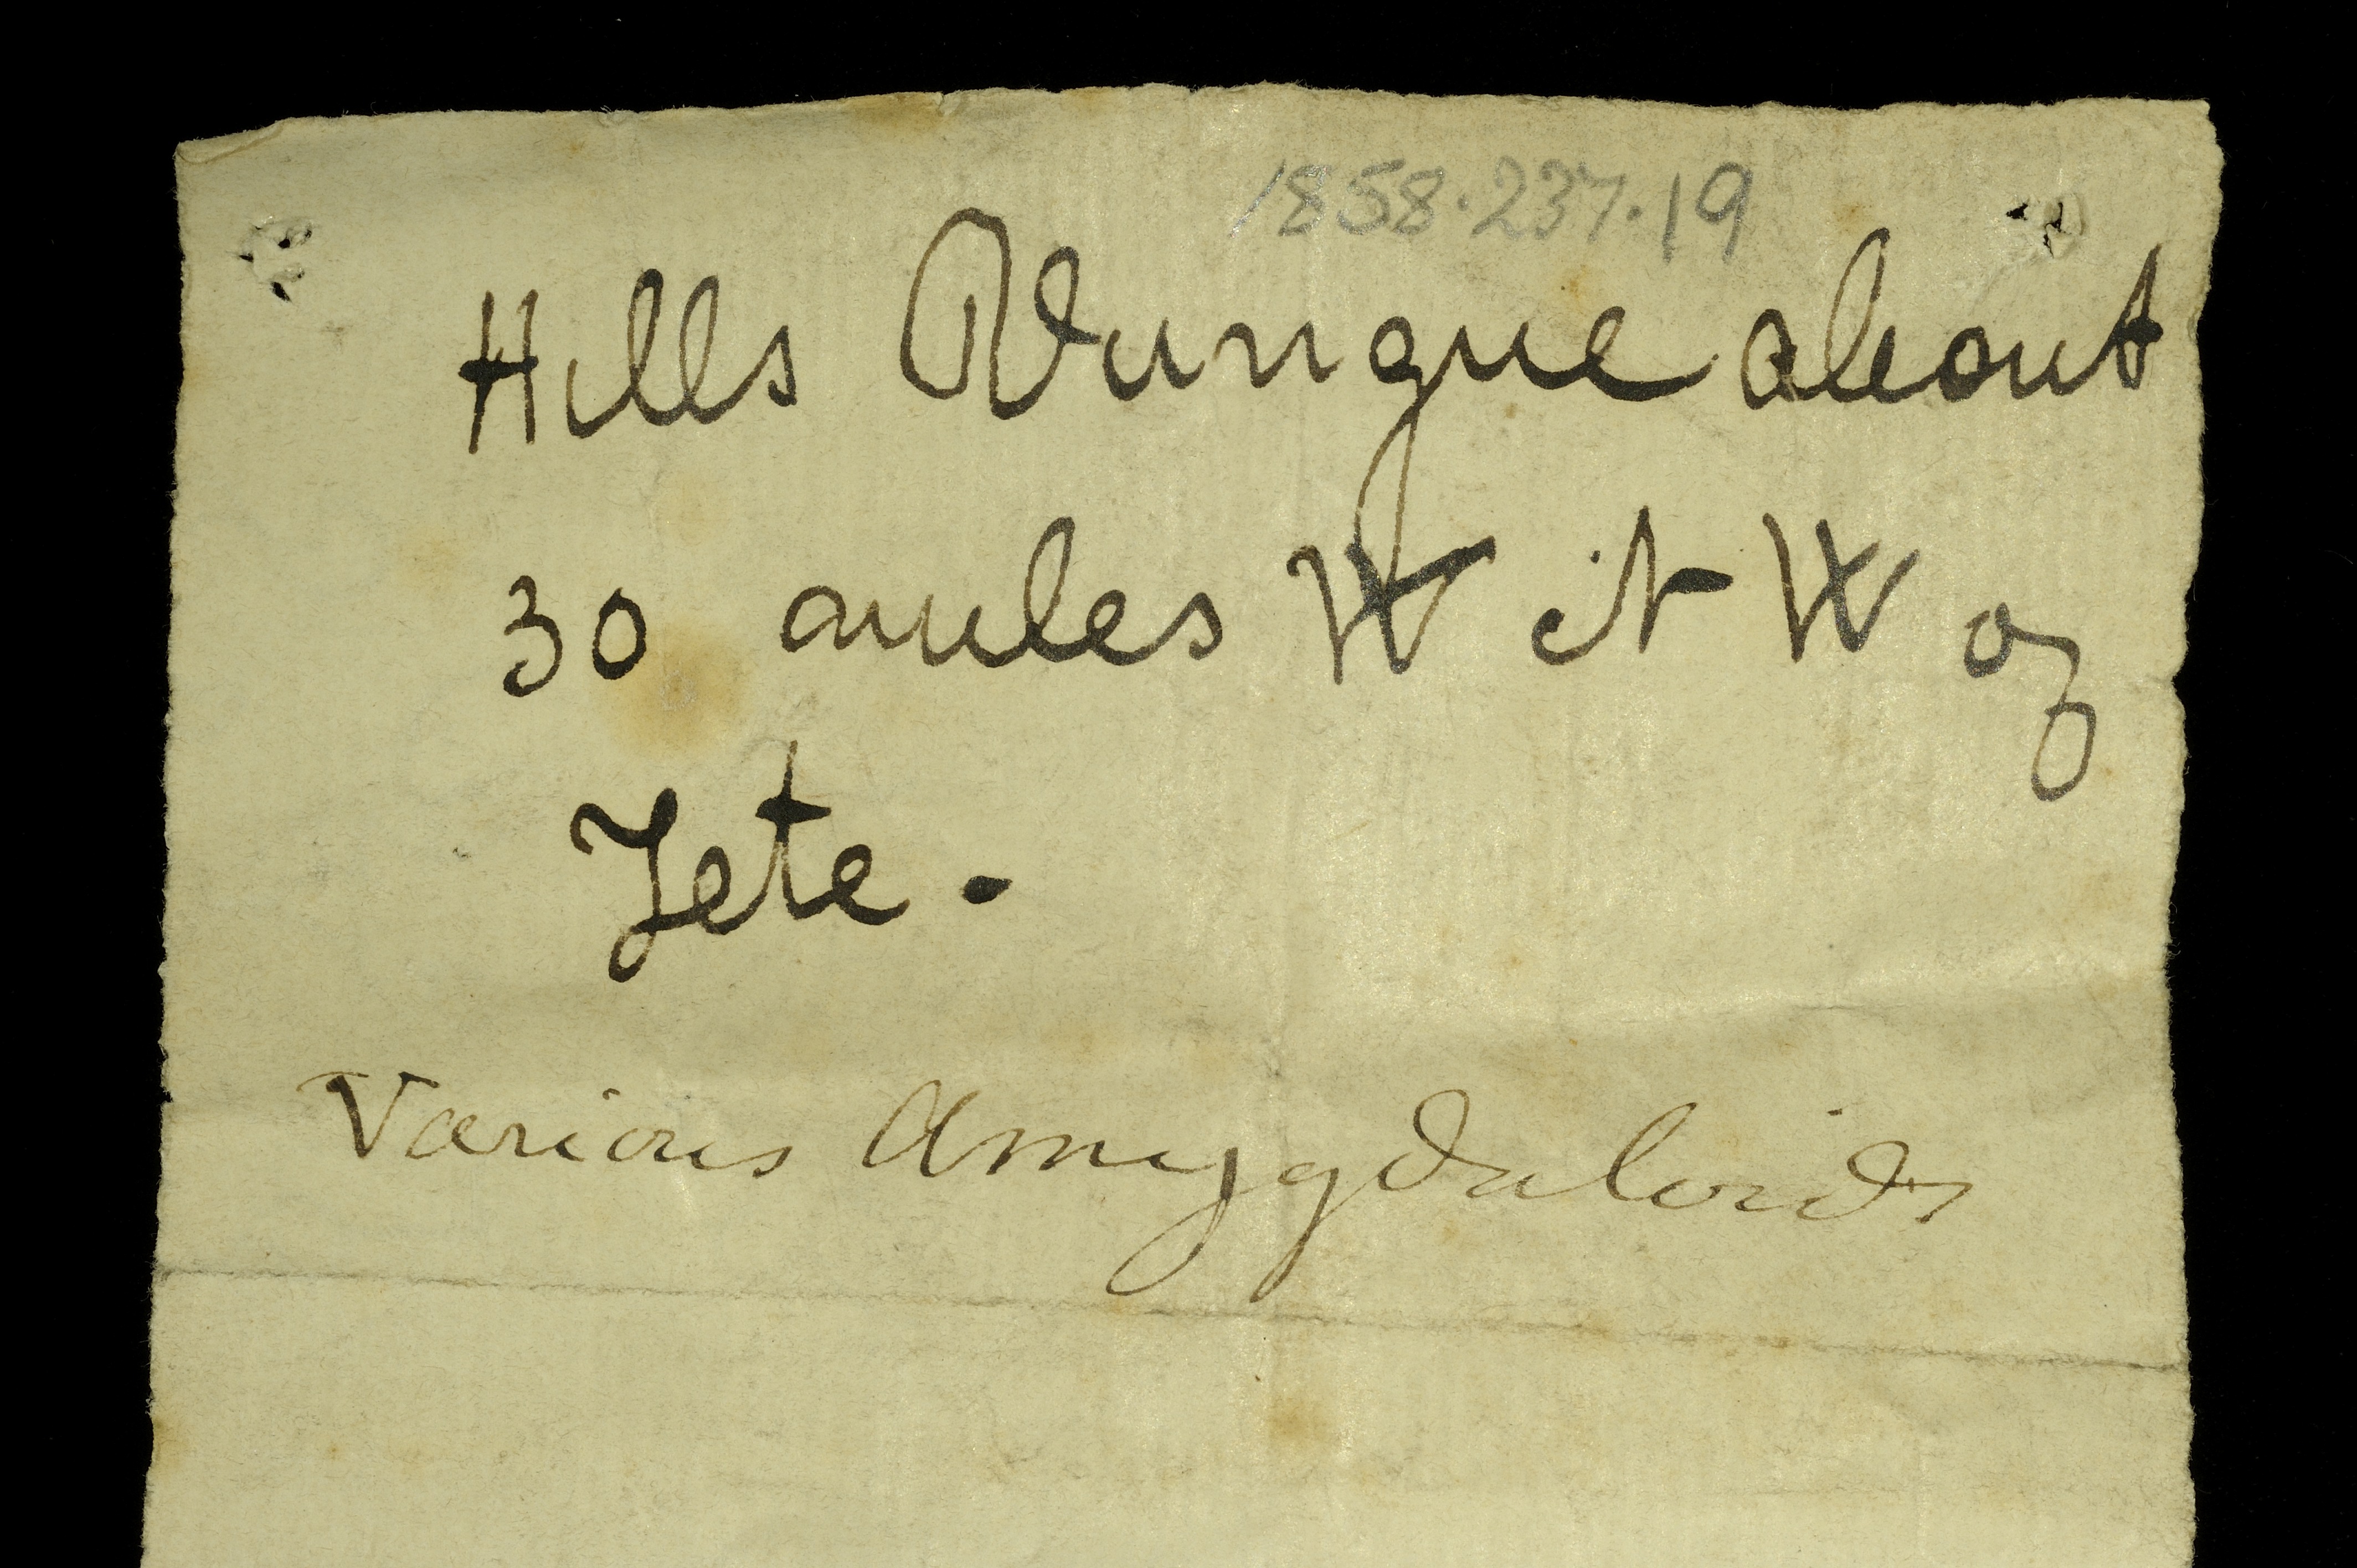 Livingstone’s note written in the field for the amygdales: ‘Hills Vunga about 30 miles WNW of Tete.’